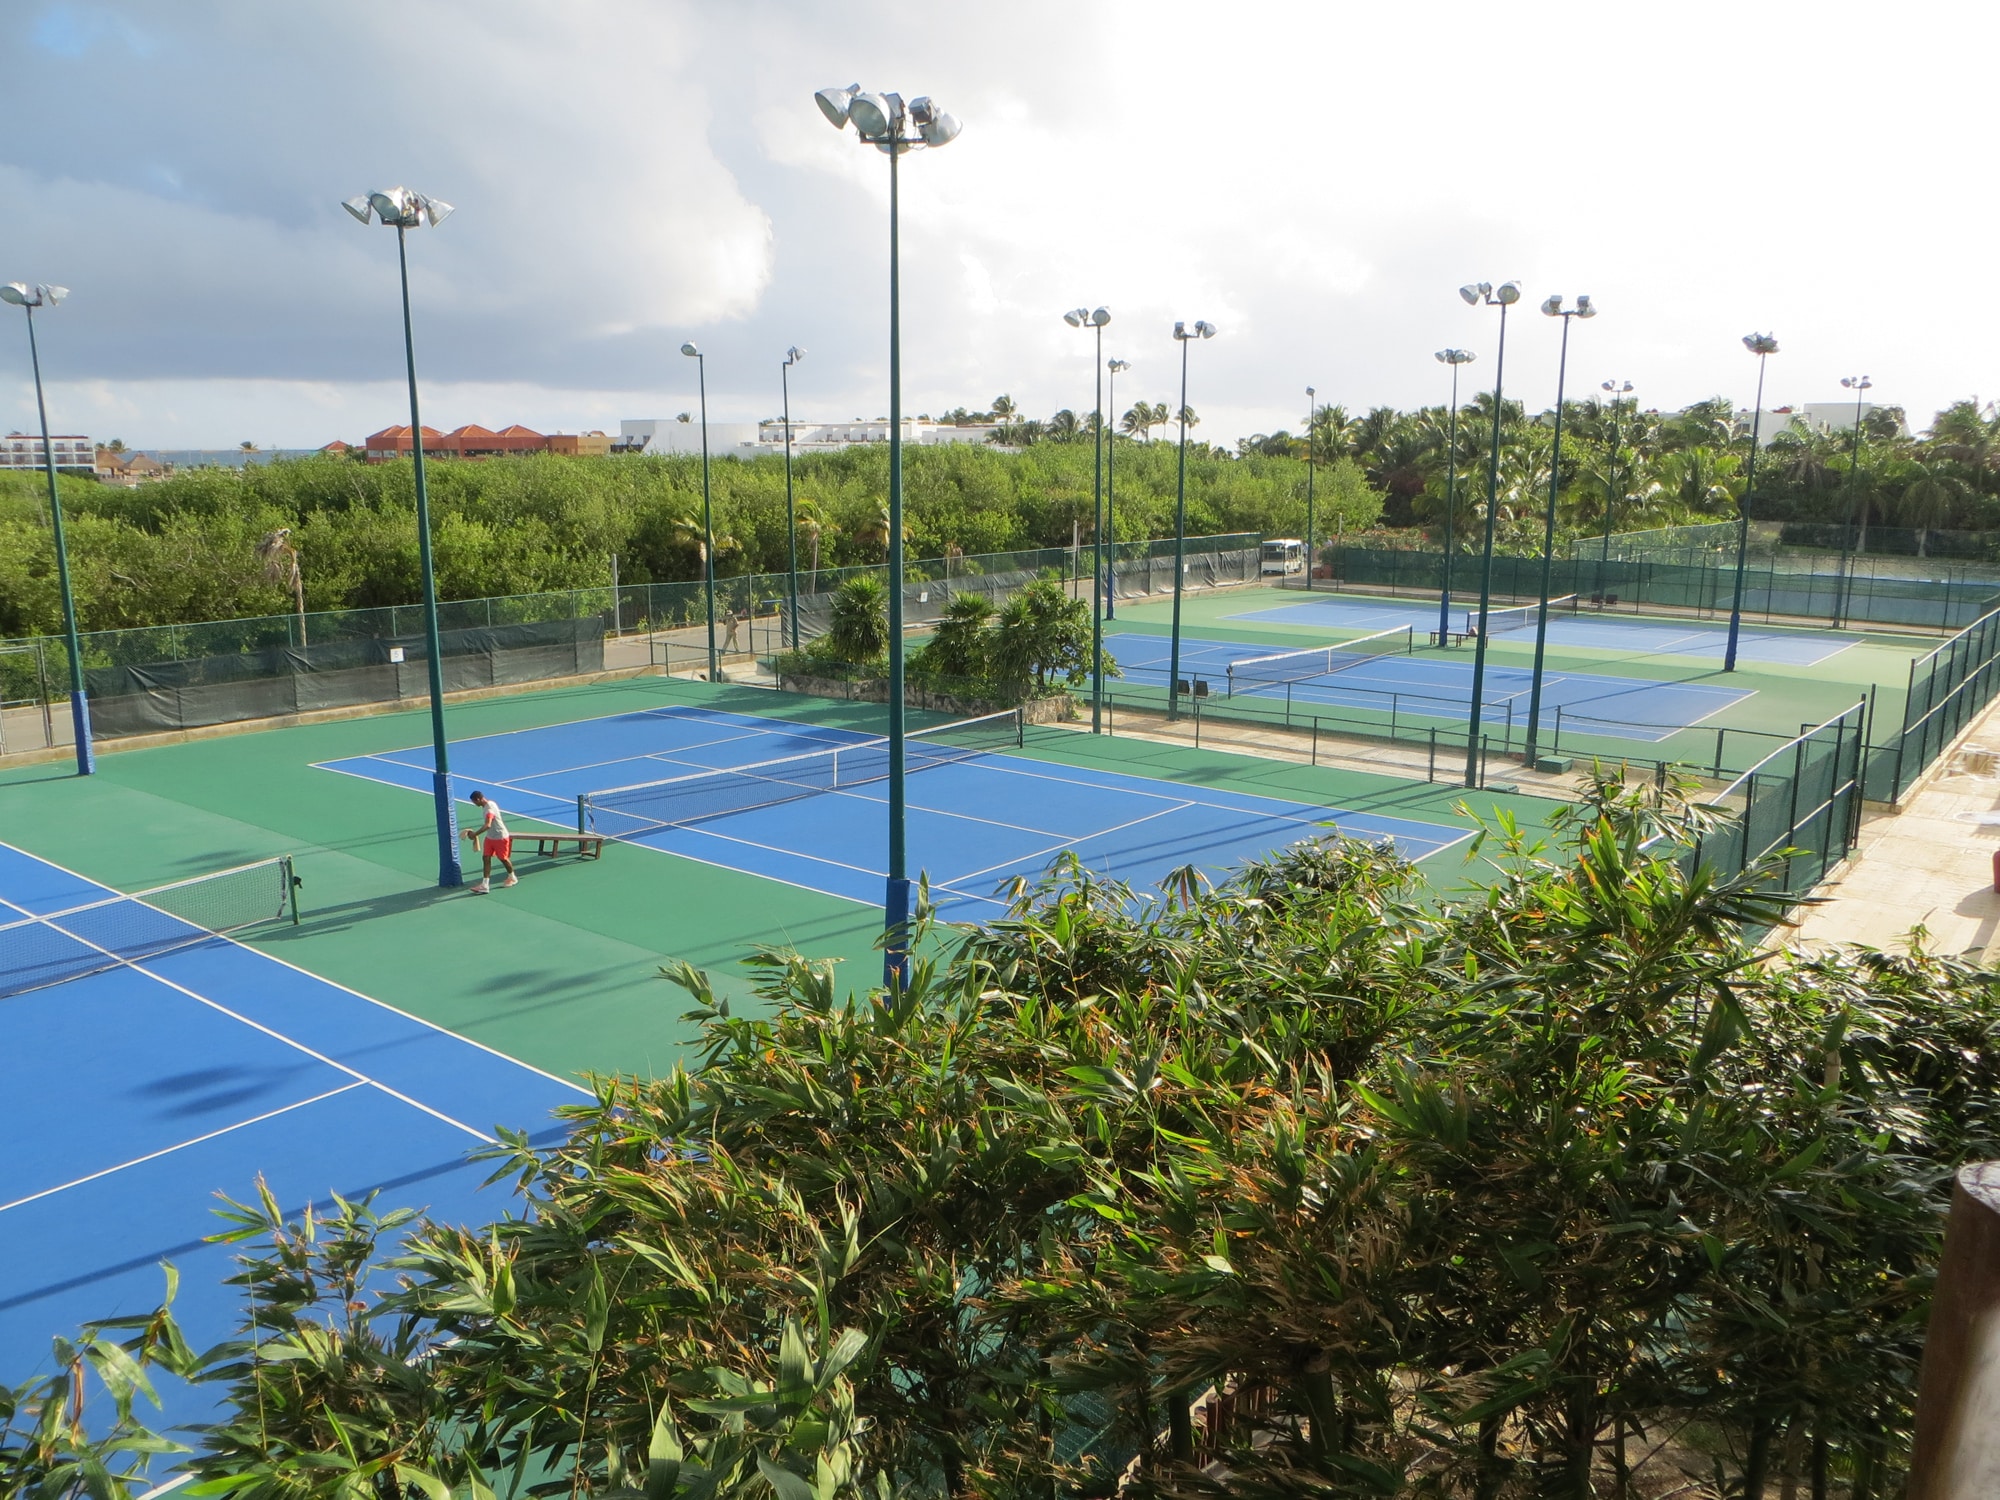 Club Med Cancun | Best Family-Friendly All-Inclusive Resort in Cancun Mexico | Tennis Courts